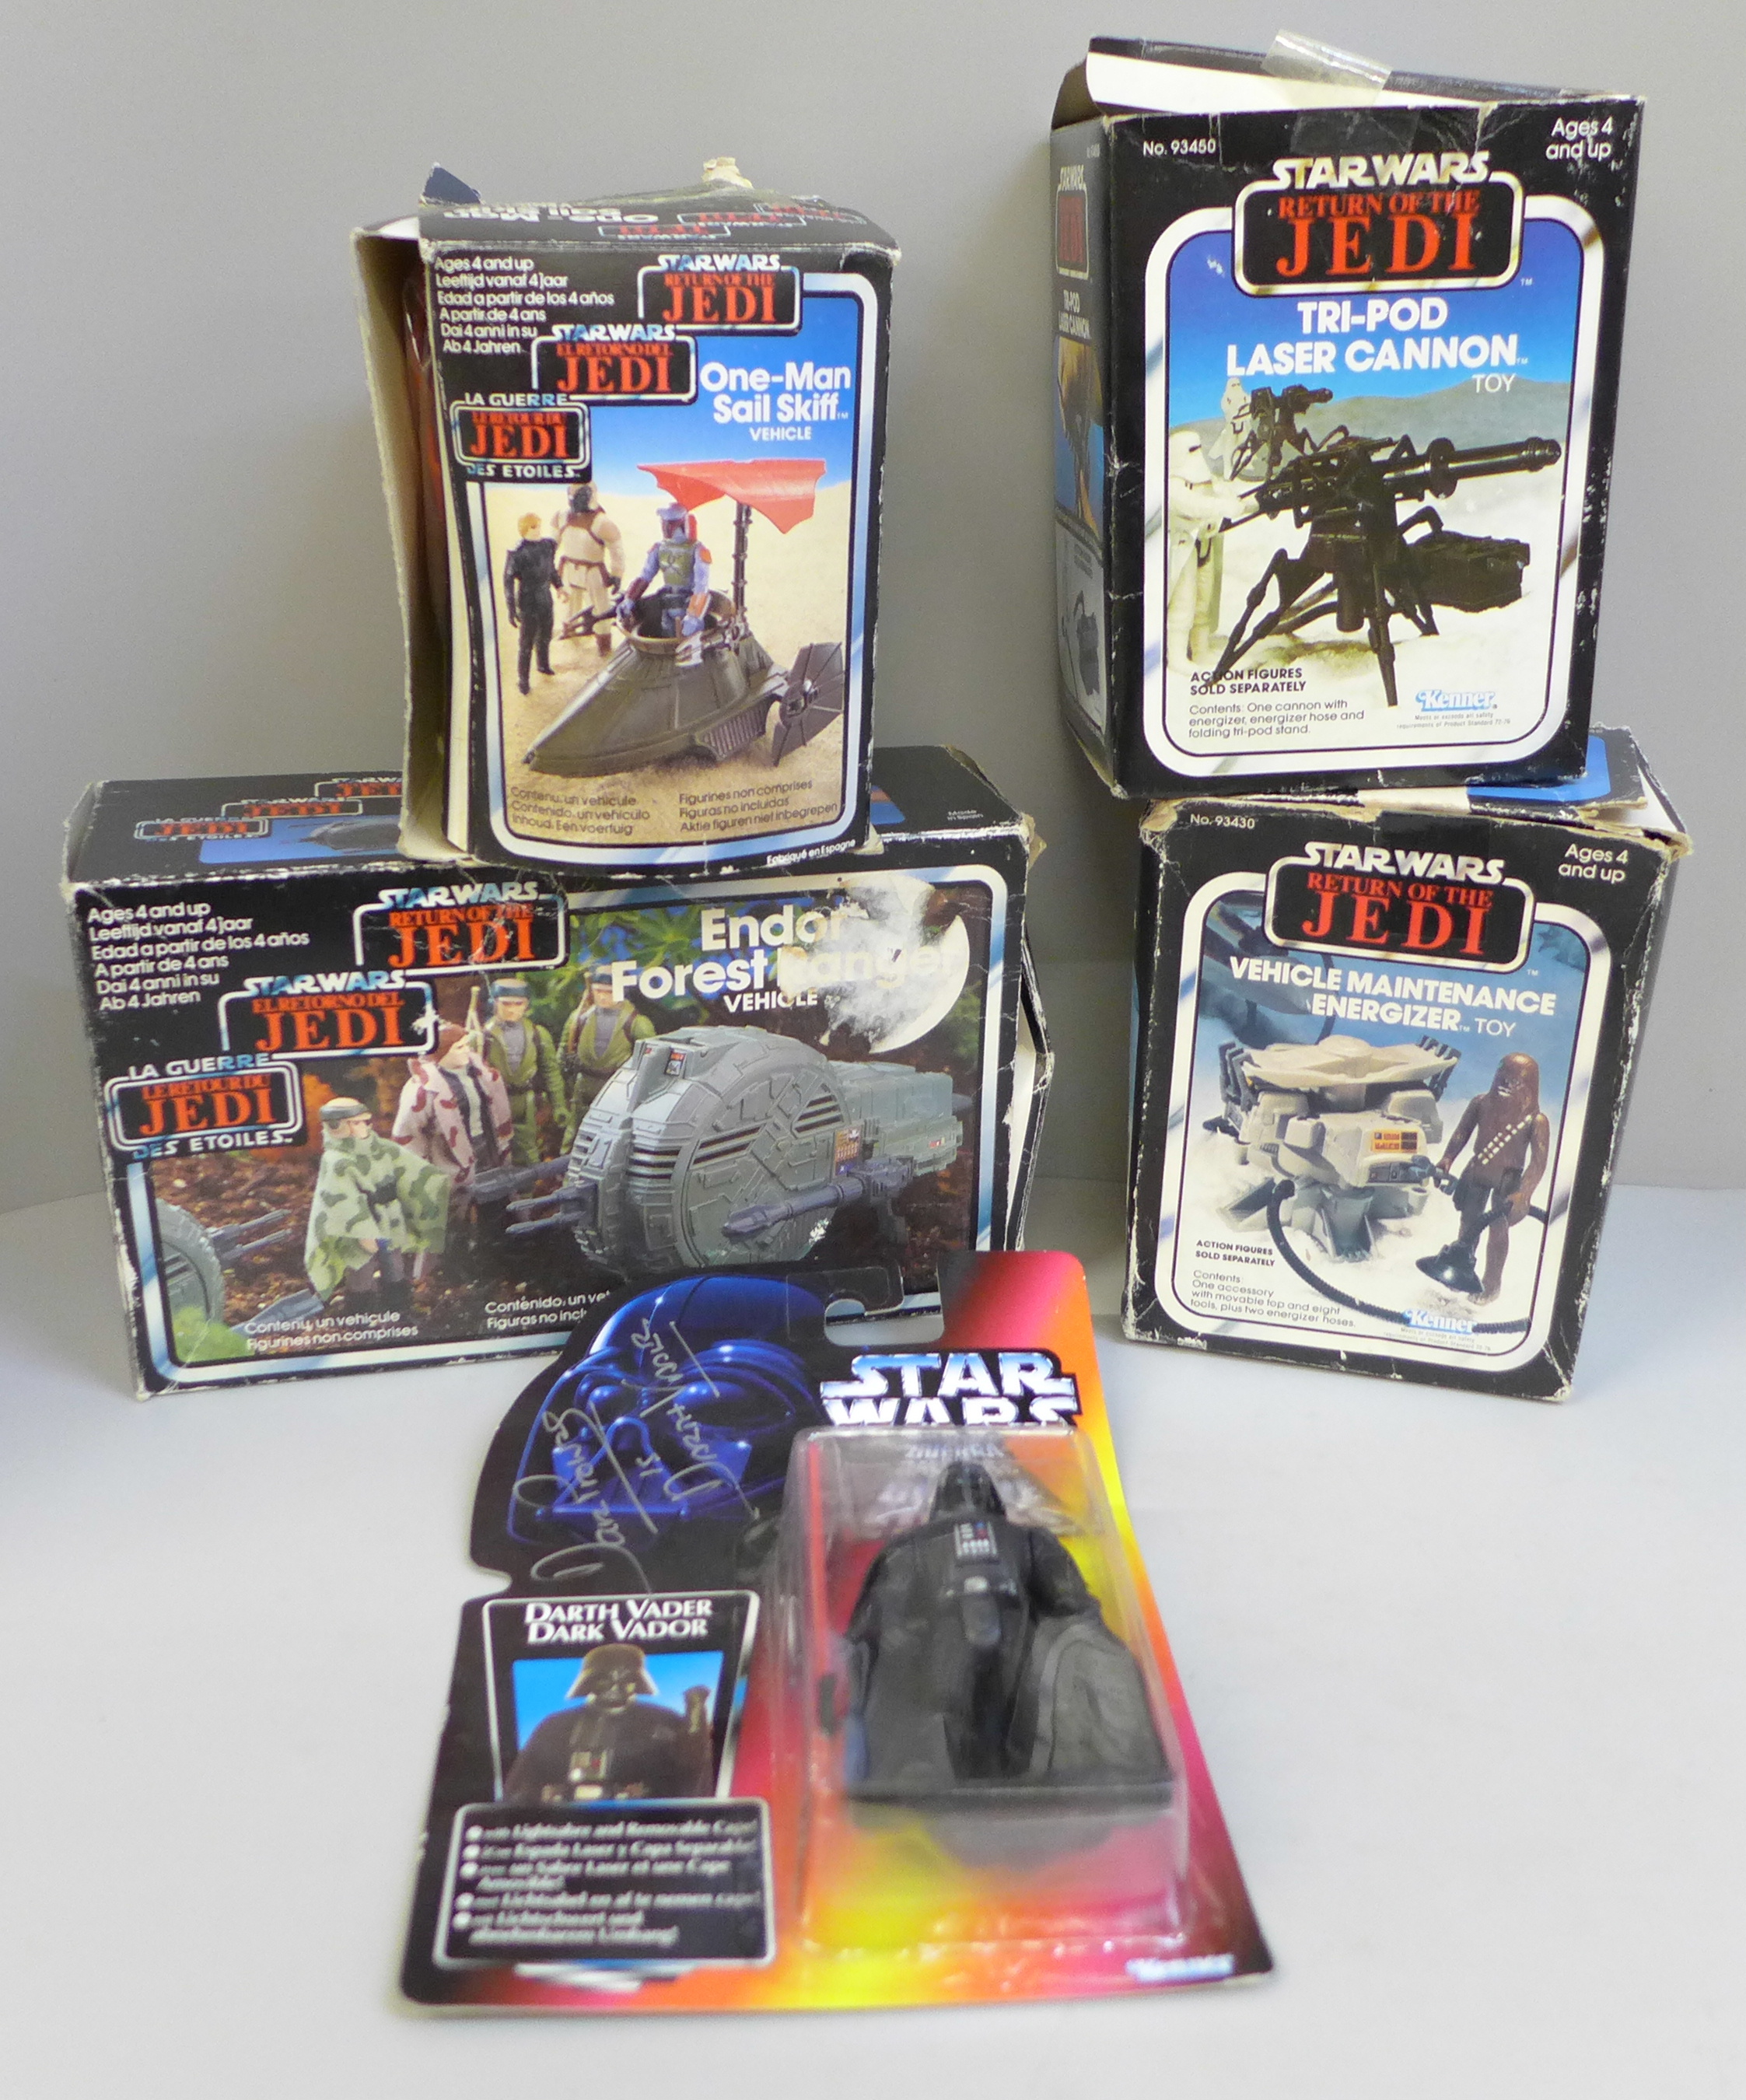 A 1995 sealed Darth Vader Star Wars figure, signed by David Prowse and four 1983 Kenner new Return